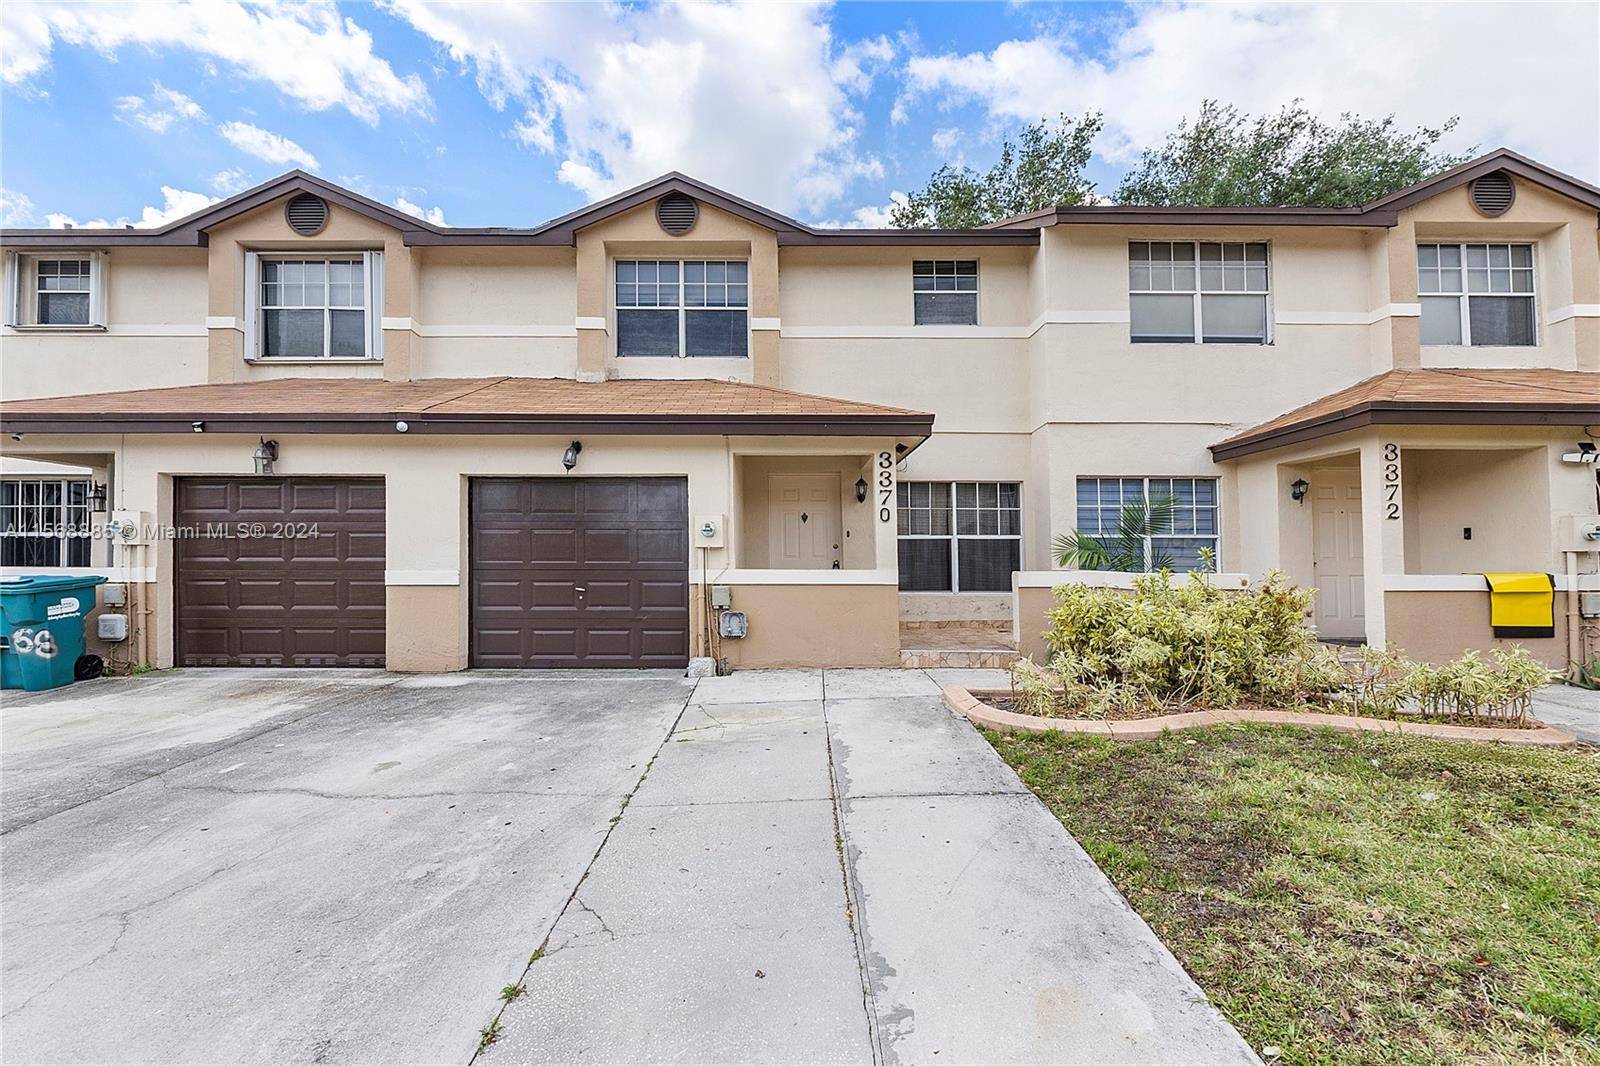 Spacious 3 bedroom 2 1 2 bathroom home in desirable Honey Hill Park gated community.